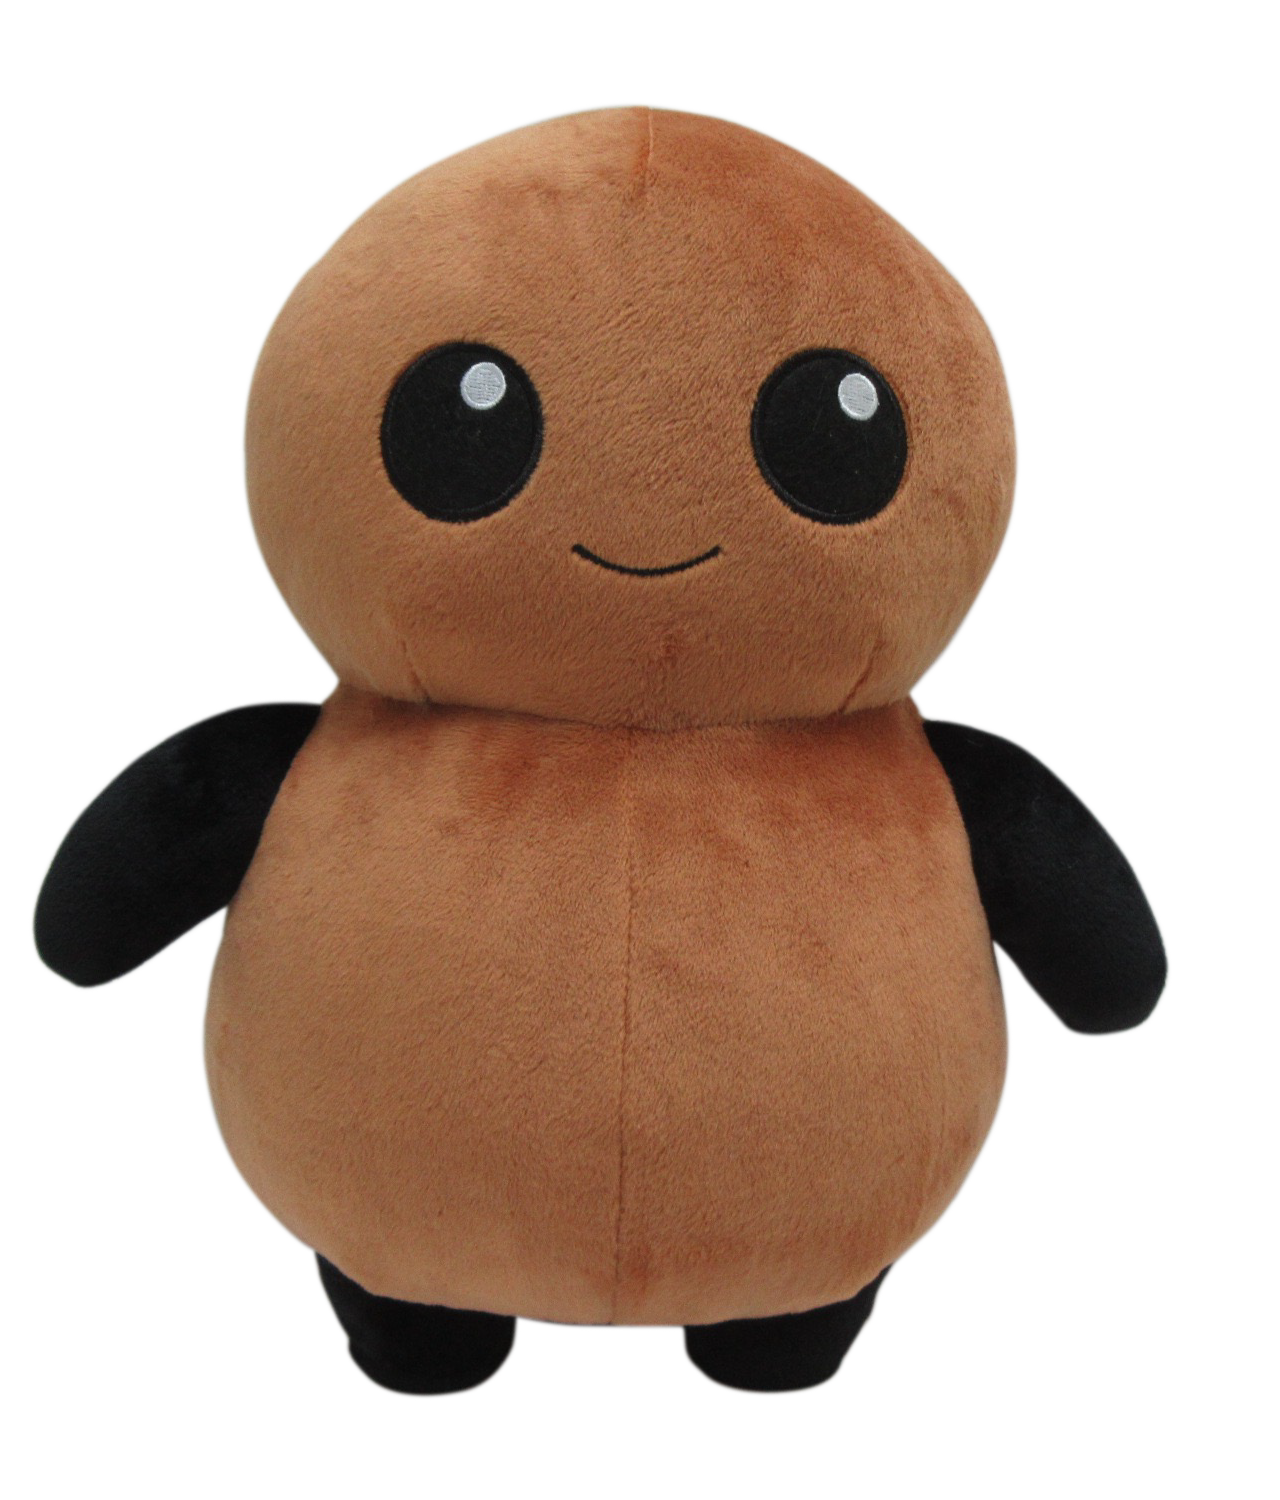 The Official Tubby Nugget Plush Toy